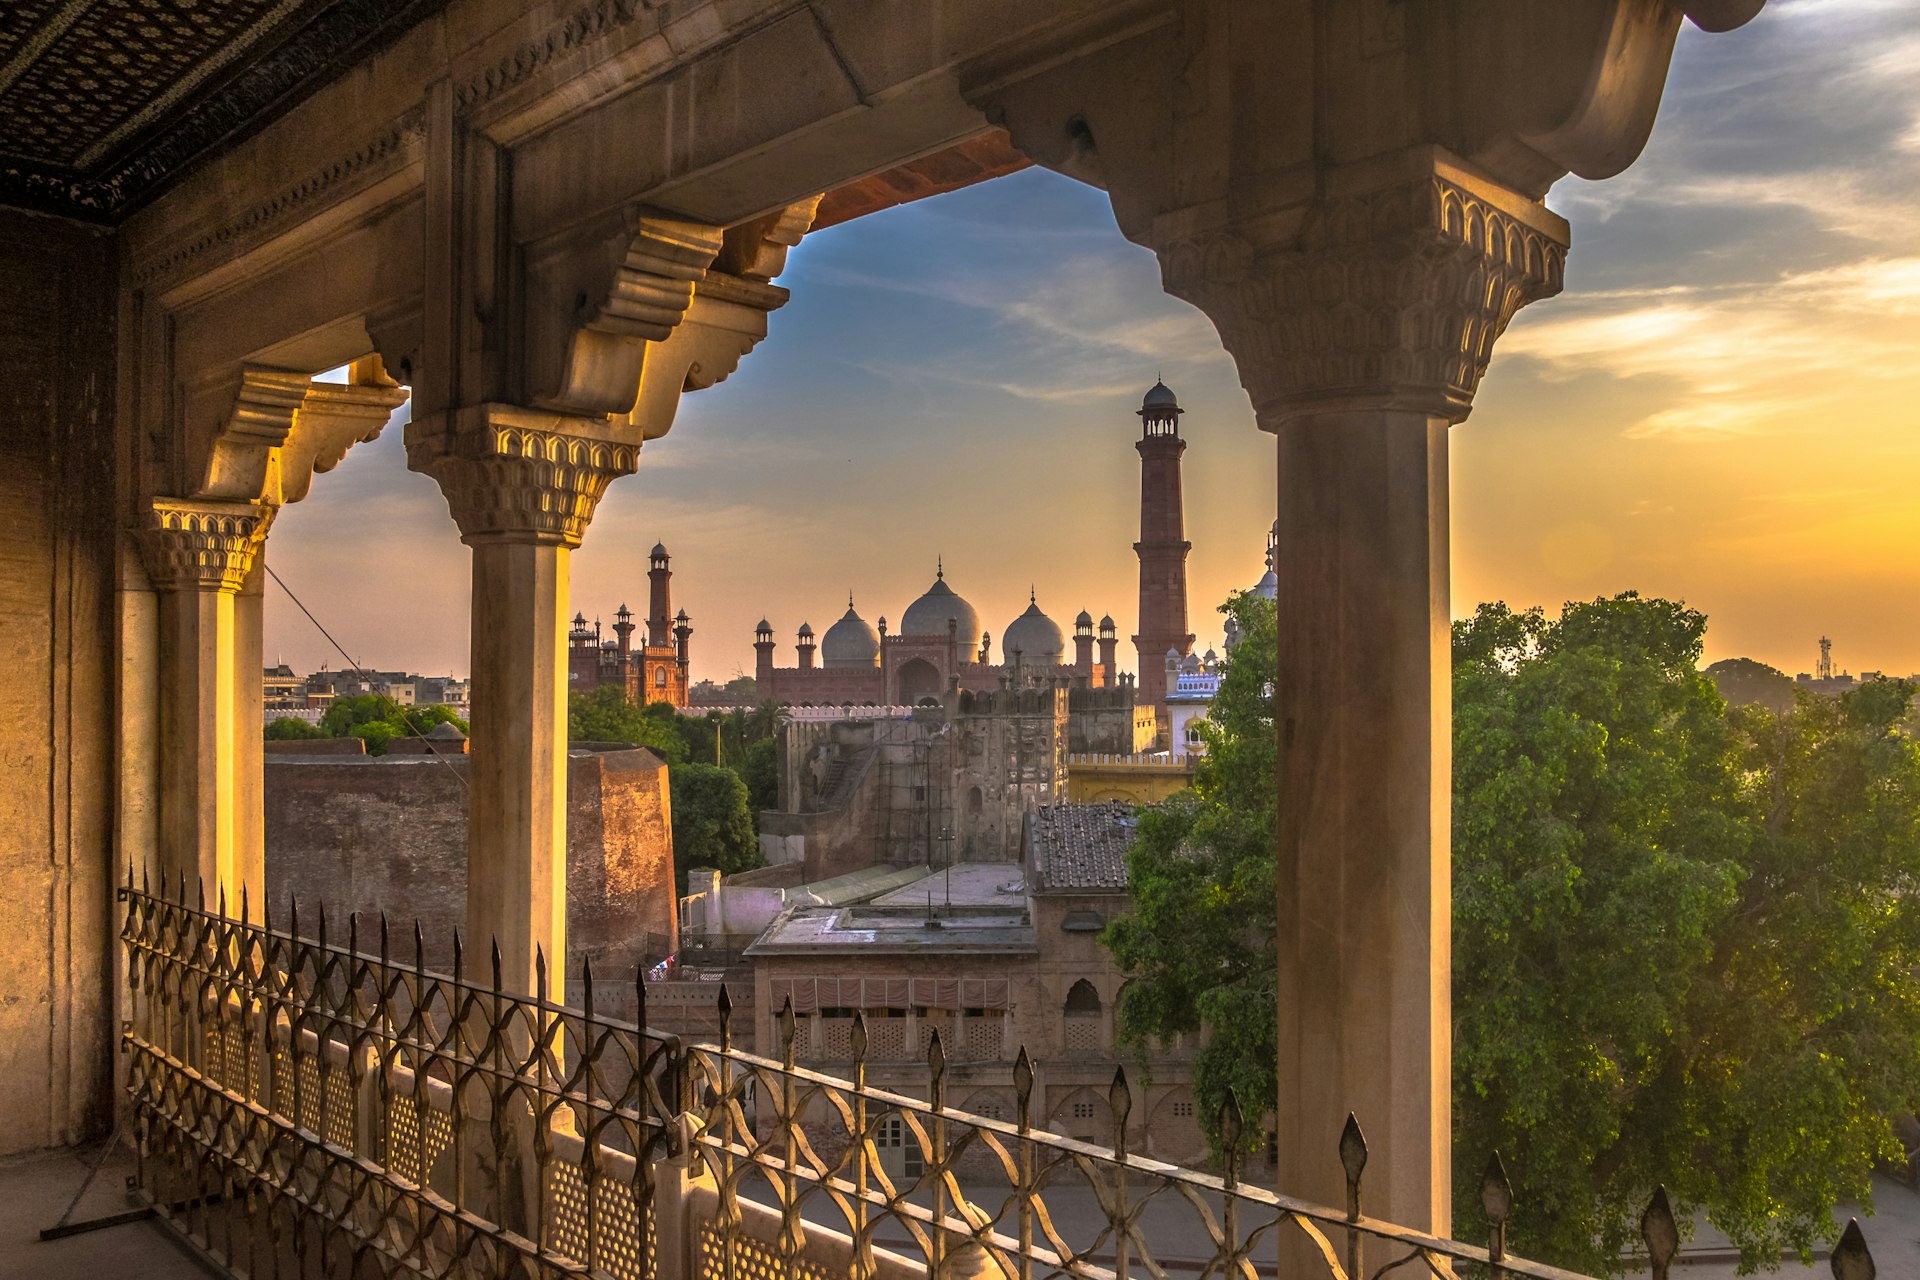 Mosque views from the balcony of Lahore Fort at sunset